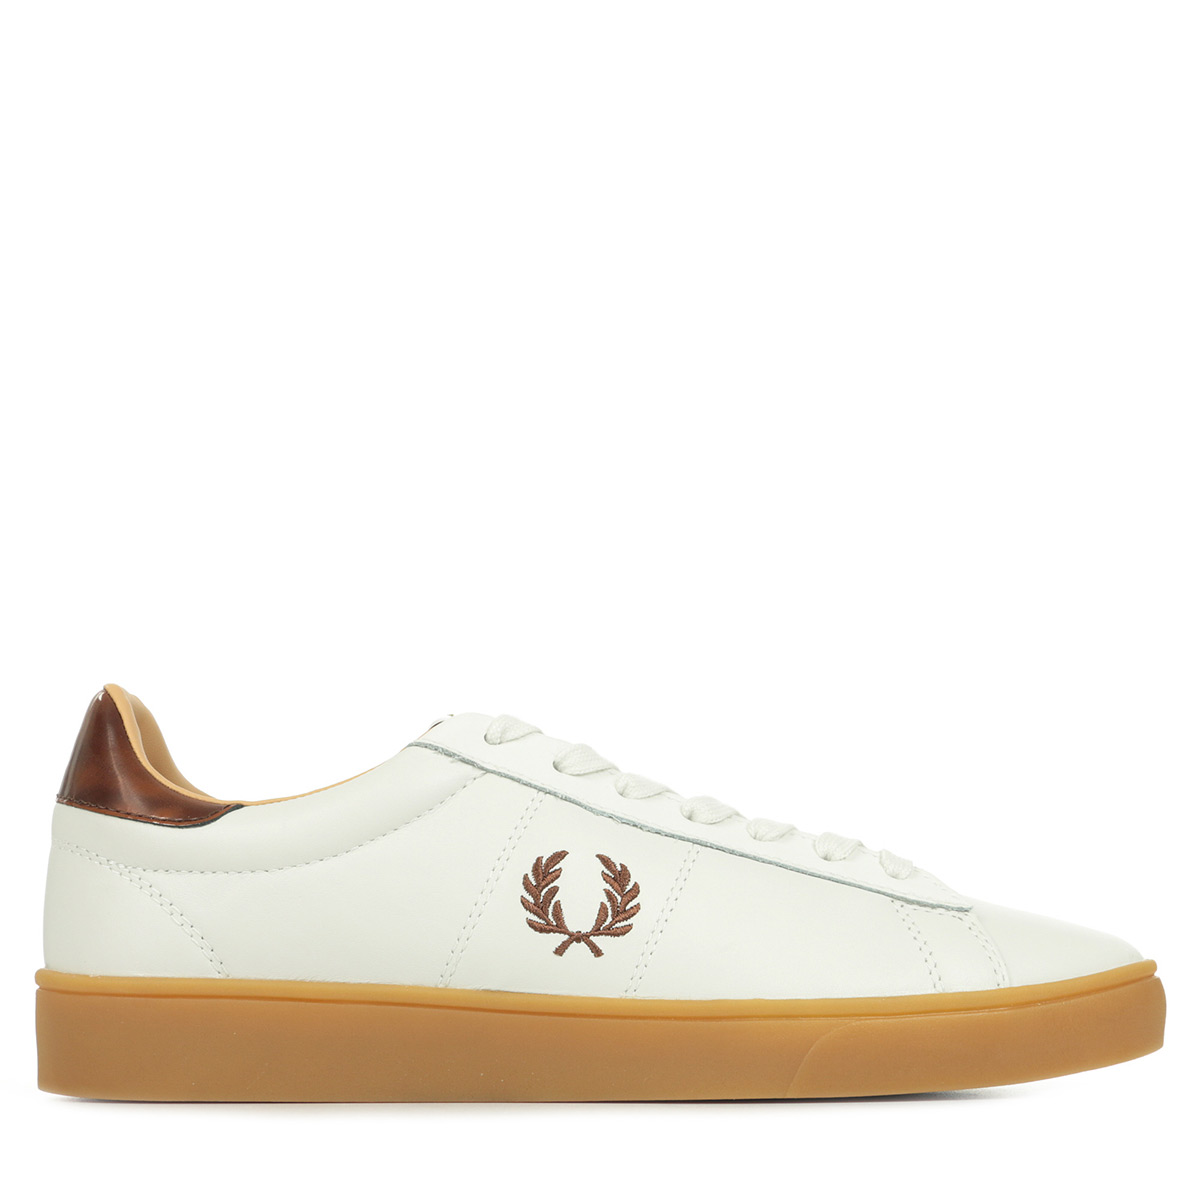 Fred Perry "Spencer Leather Tab"